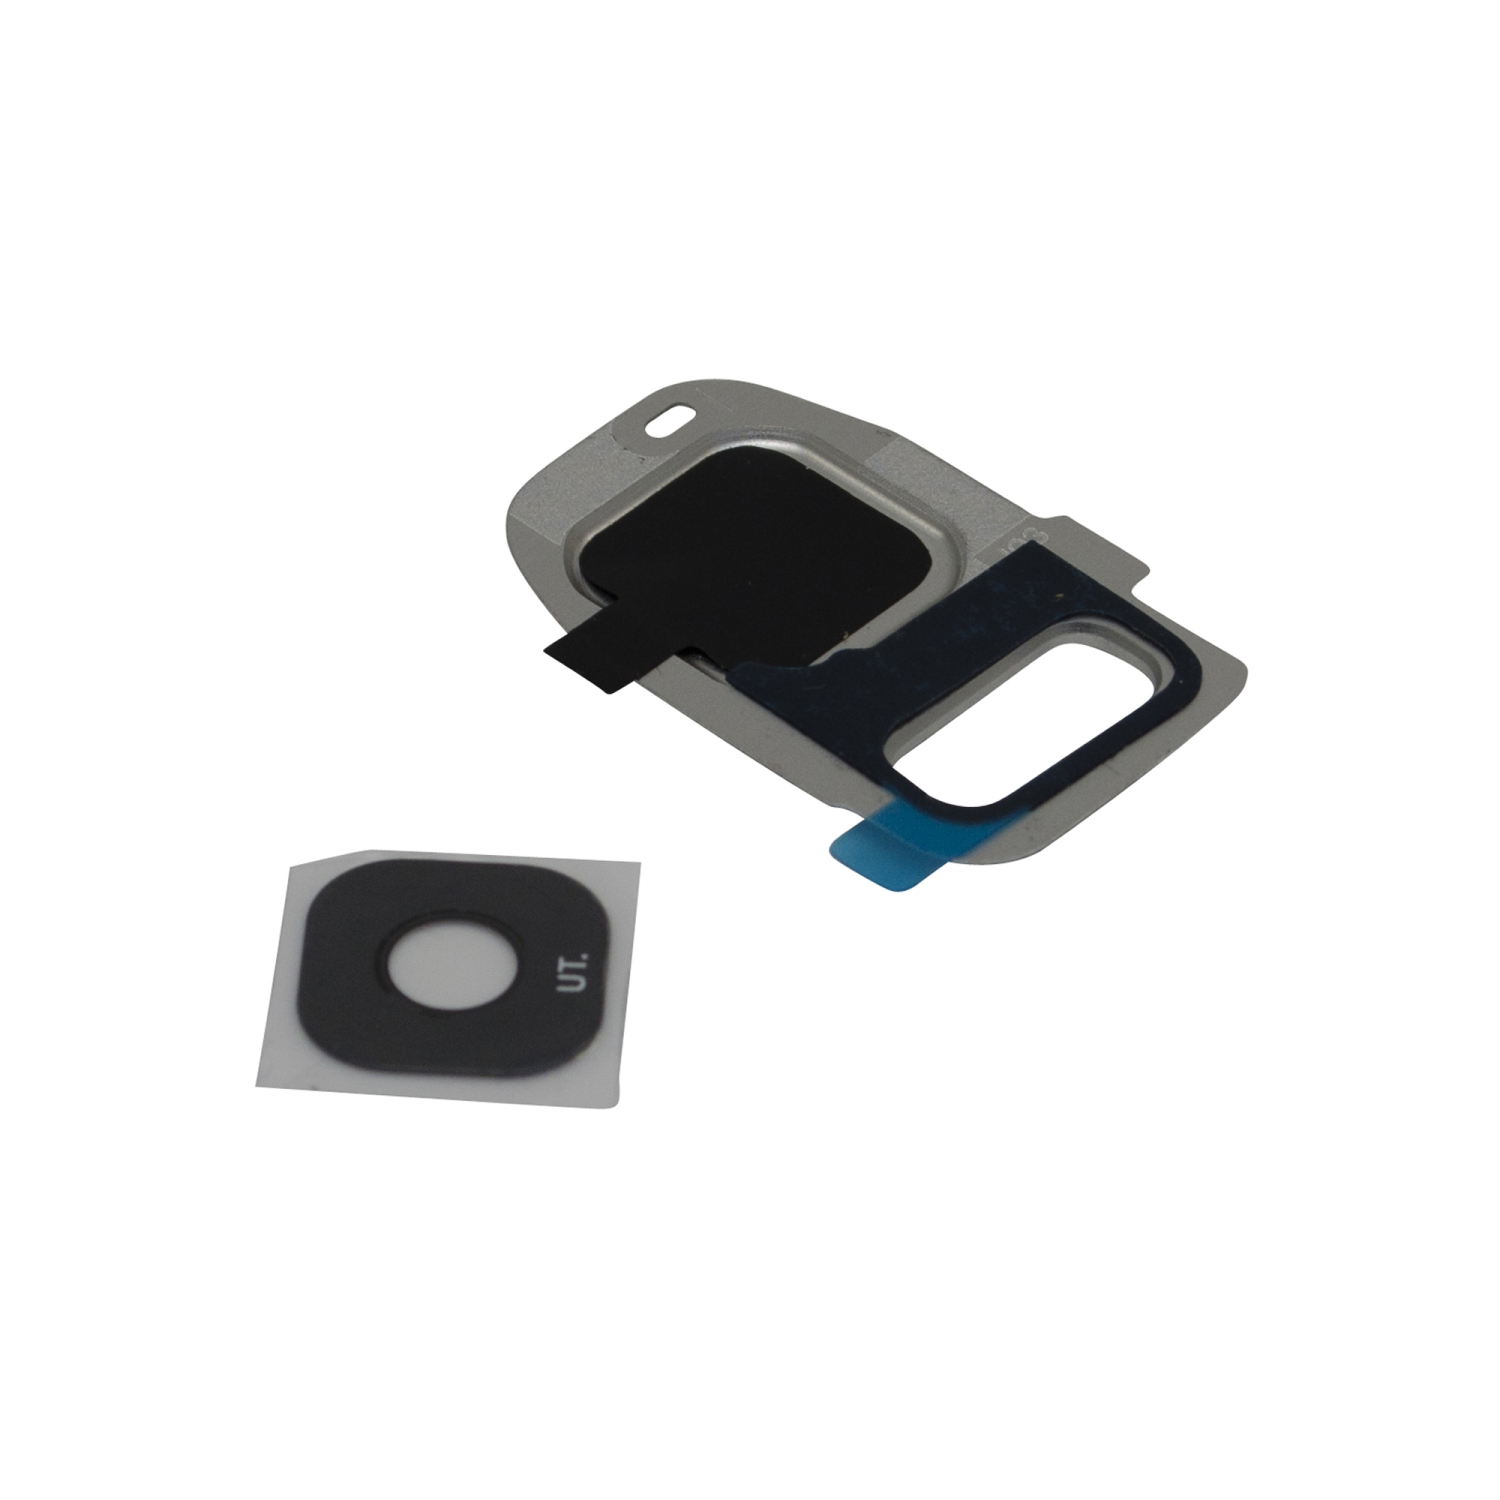 Samsung Galaxy S7 / S7 Edge Camera Lens and Bezel Replacement - Silver